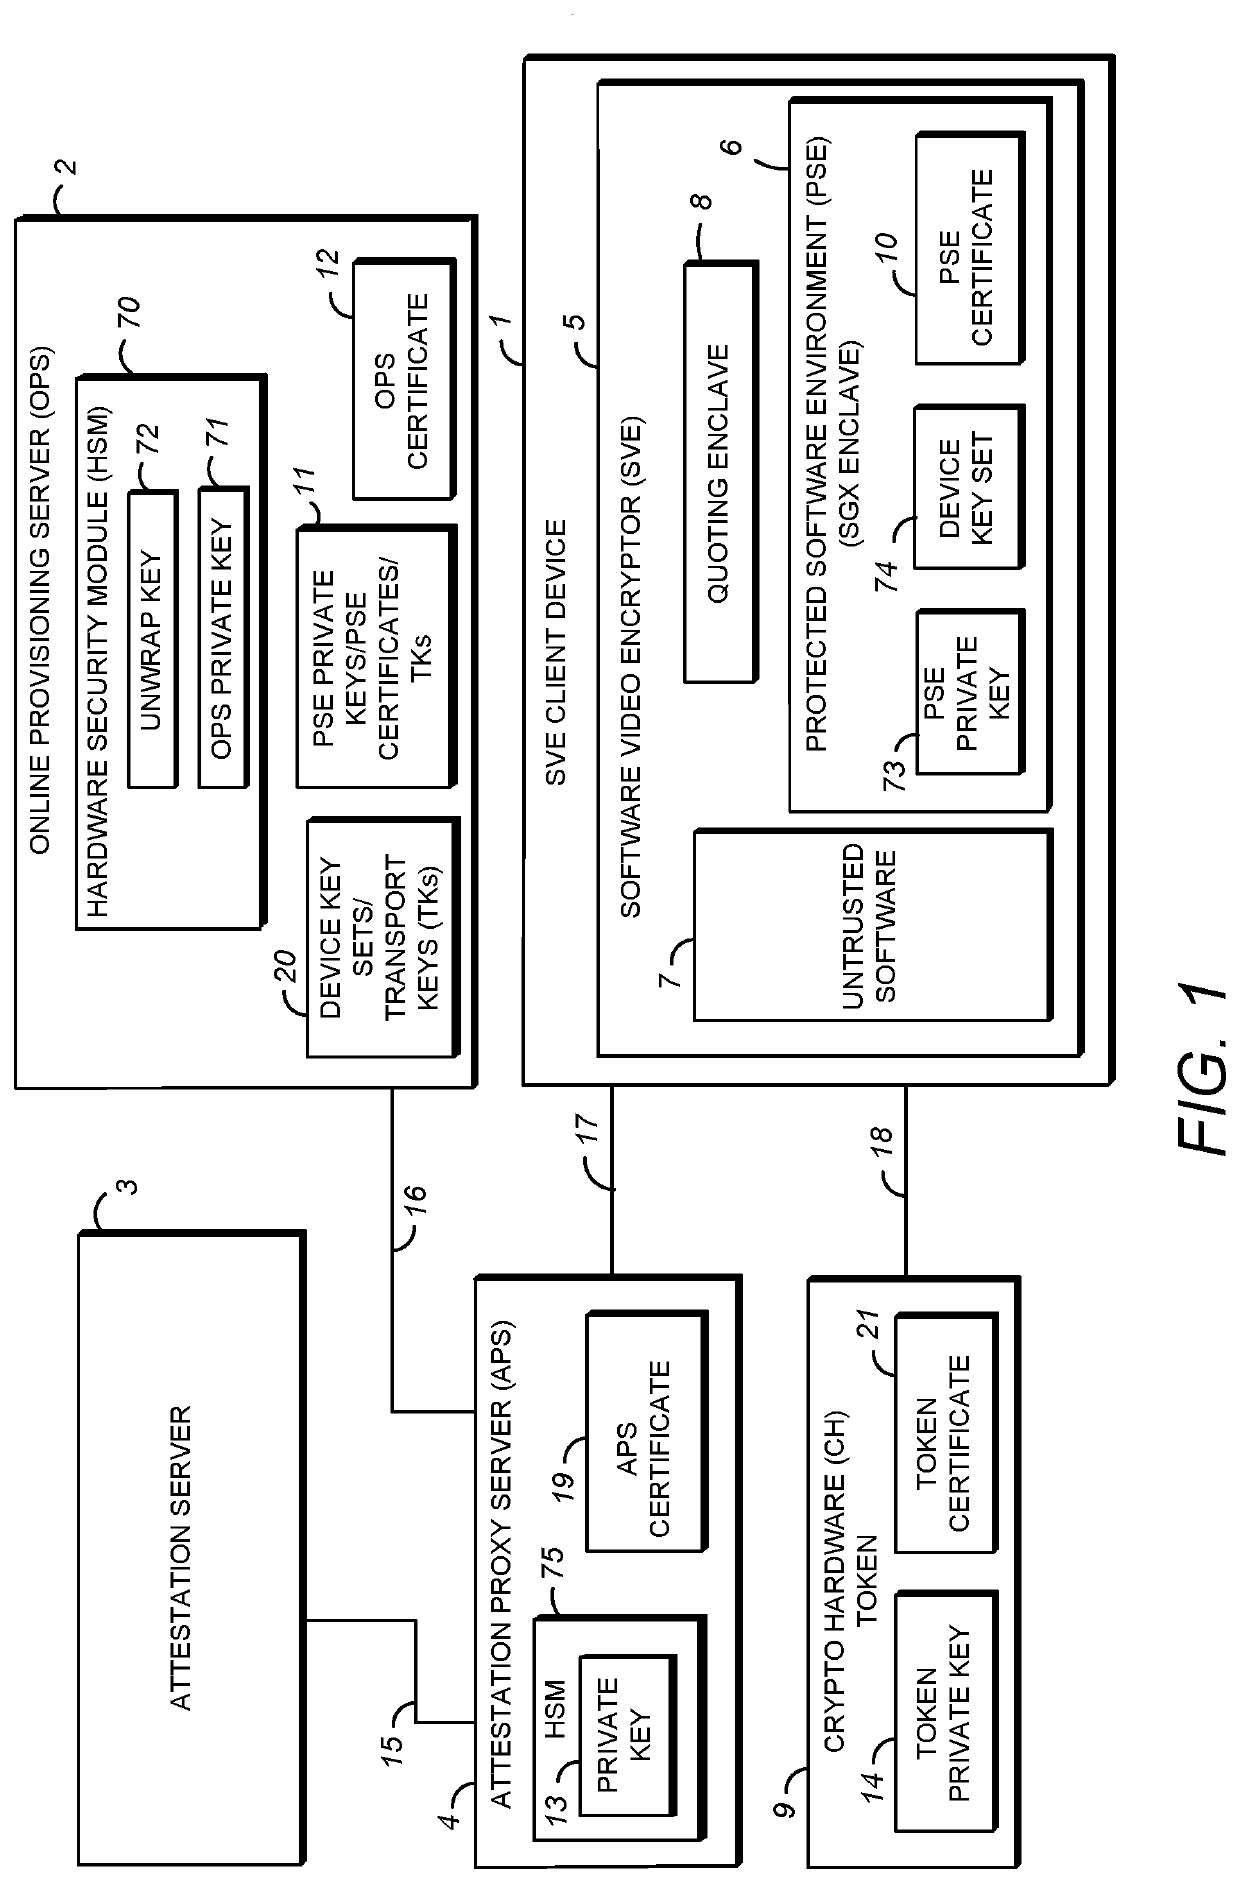 Secure distribution of device key sets over a network